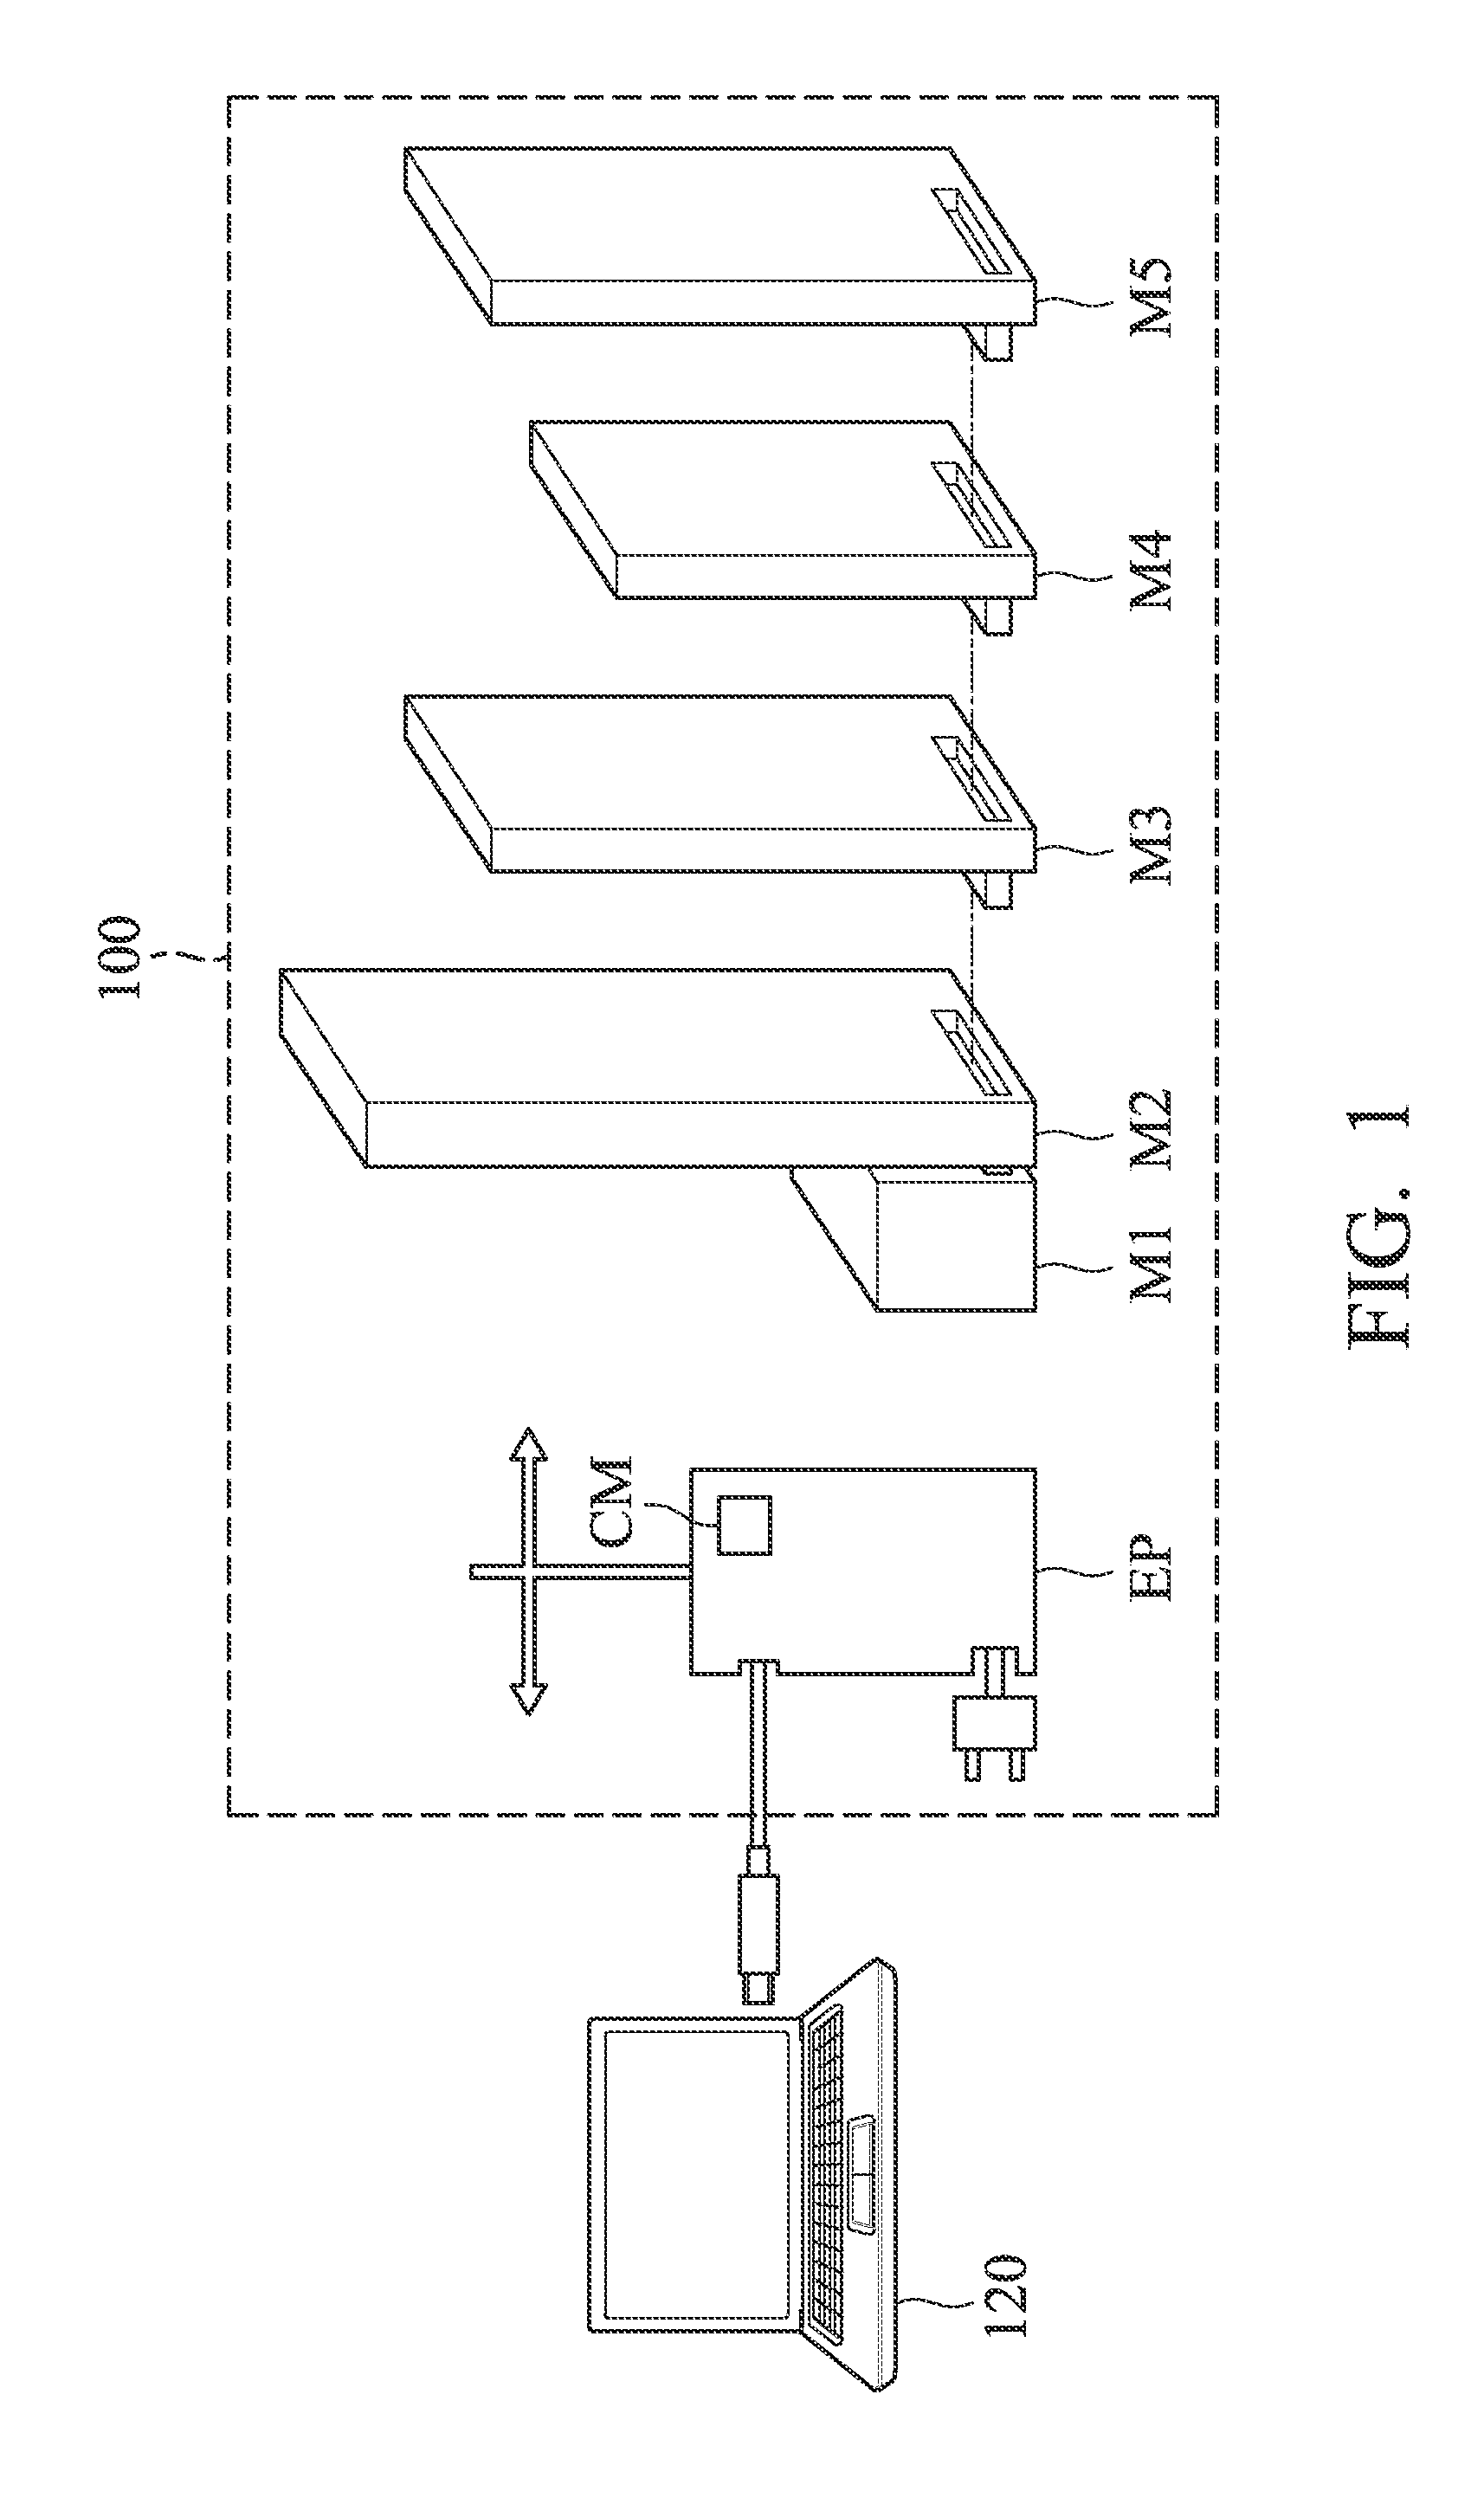 Electronic systems and performance control methods